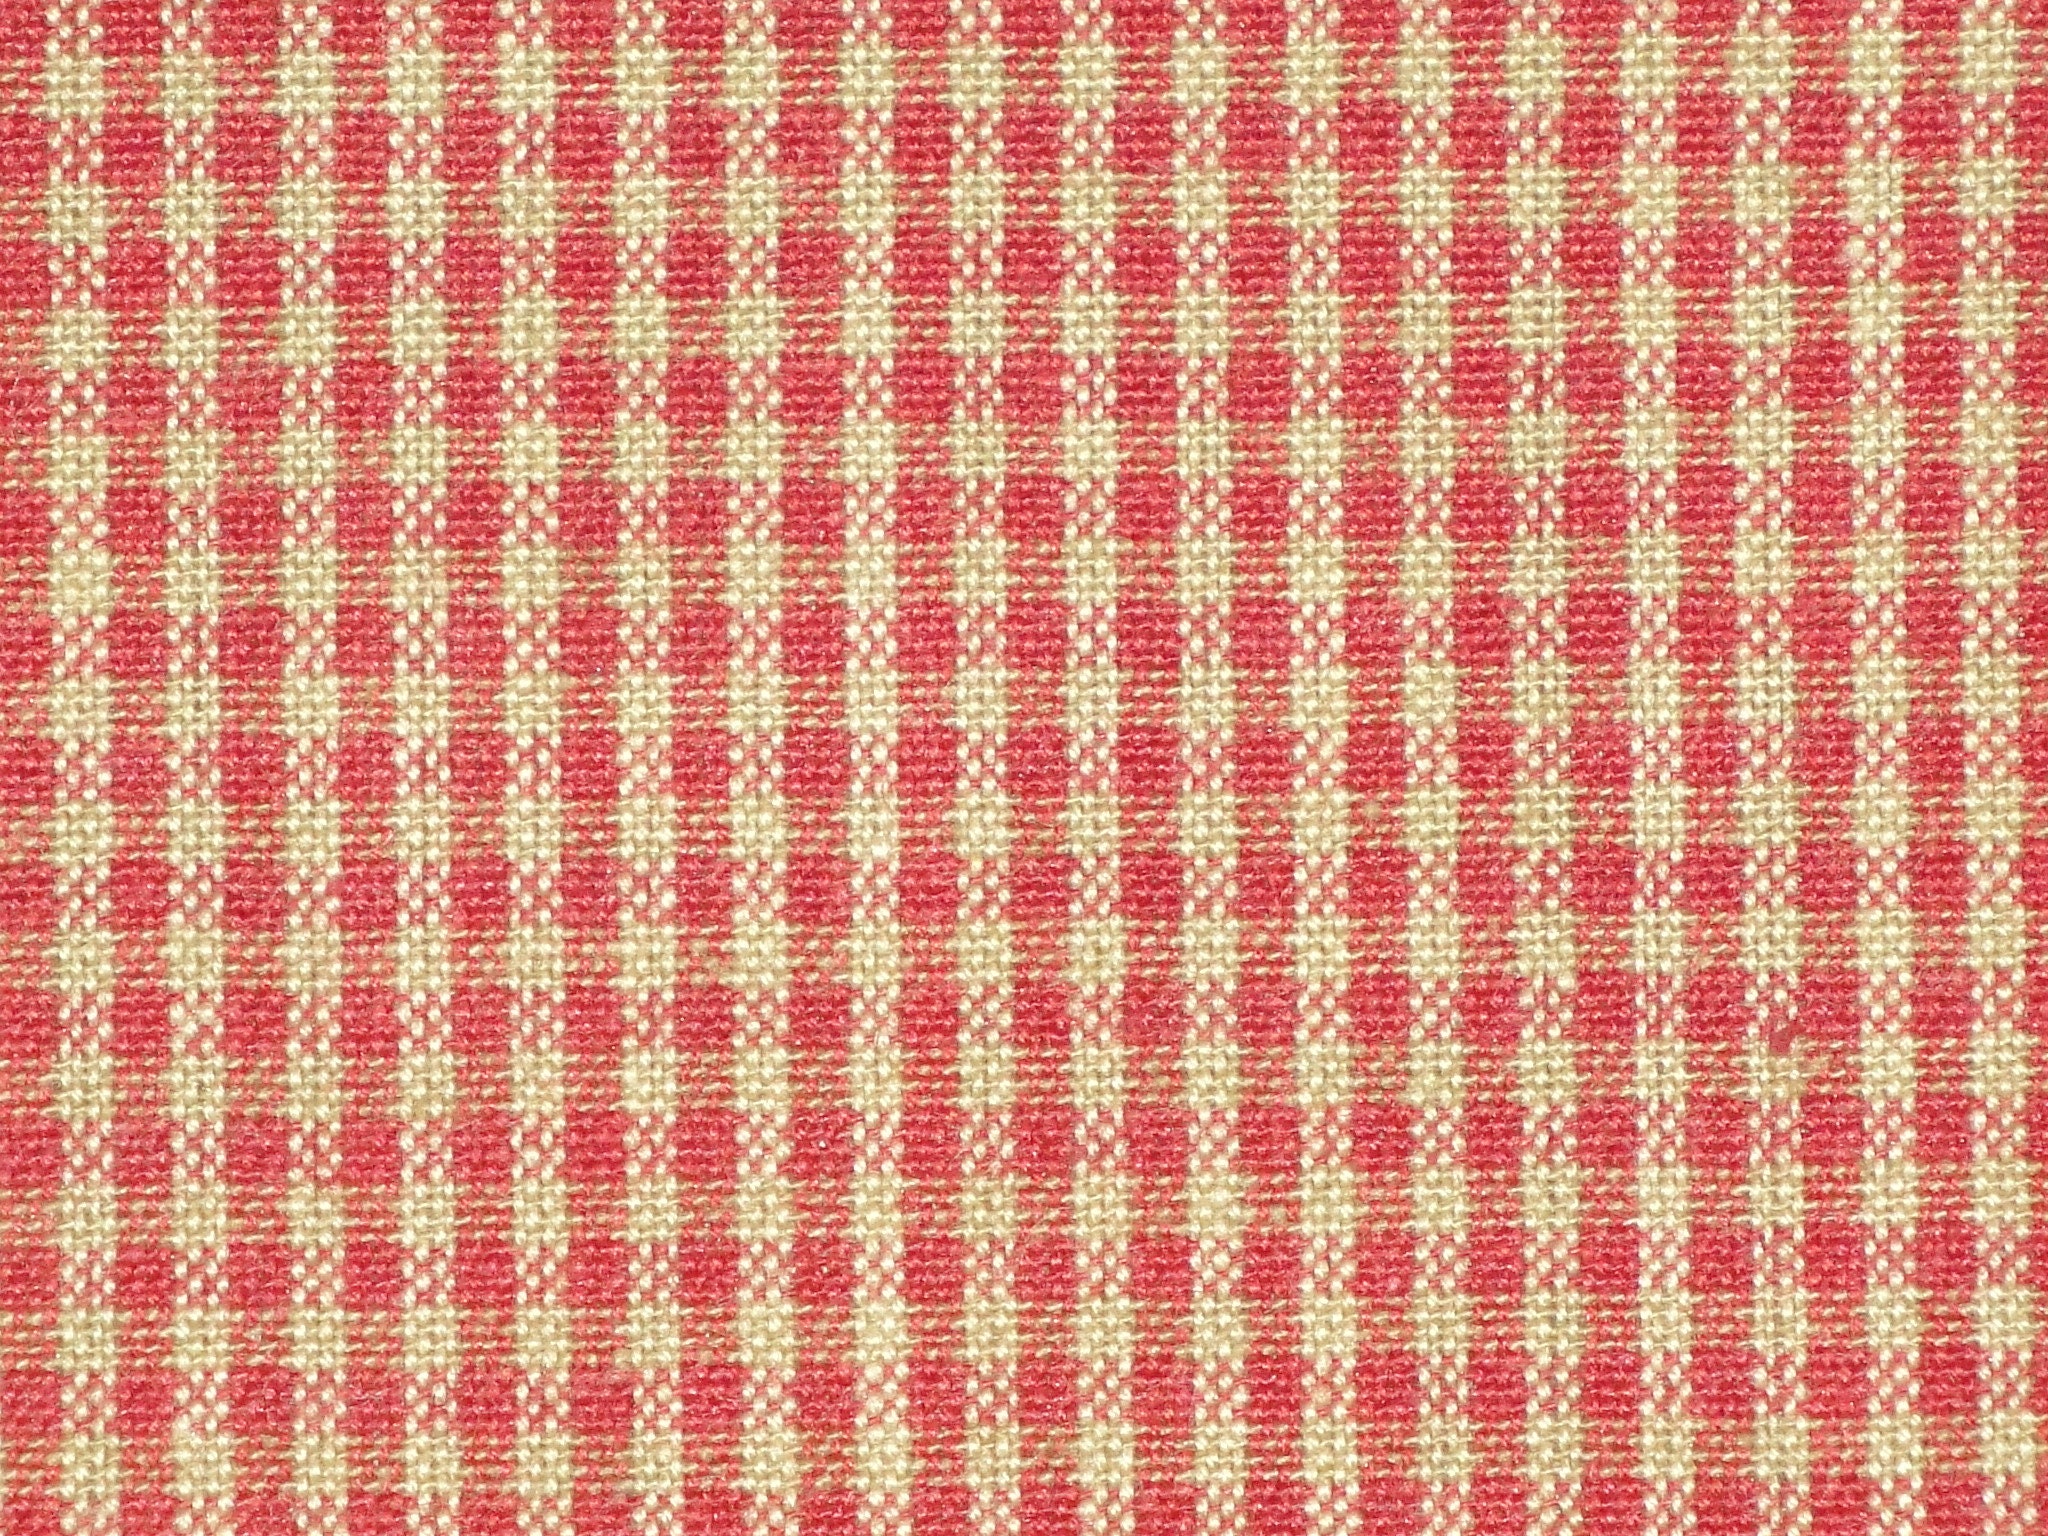 Providence Blue And Cream Woven Cotton Homespun Large Check Fabric